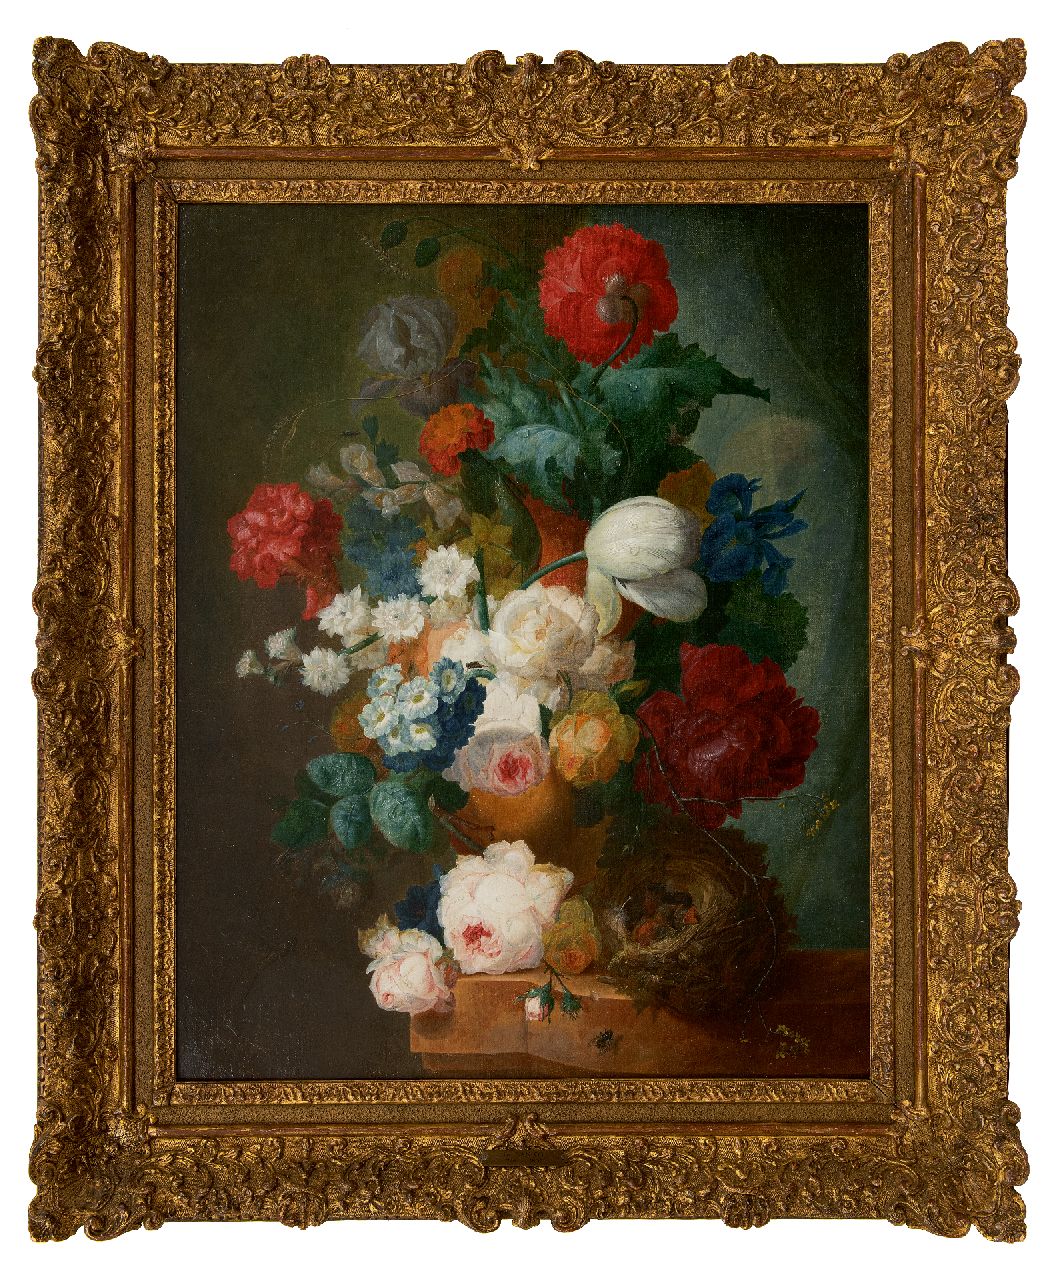 Os J. van | Jan van Os | Paintings offered for sale | Still life with roses, poppies and bird's nest, oil on canvas 66.3 x 55.0 cm, signed l.l. and dated 1775